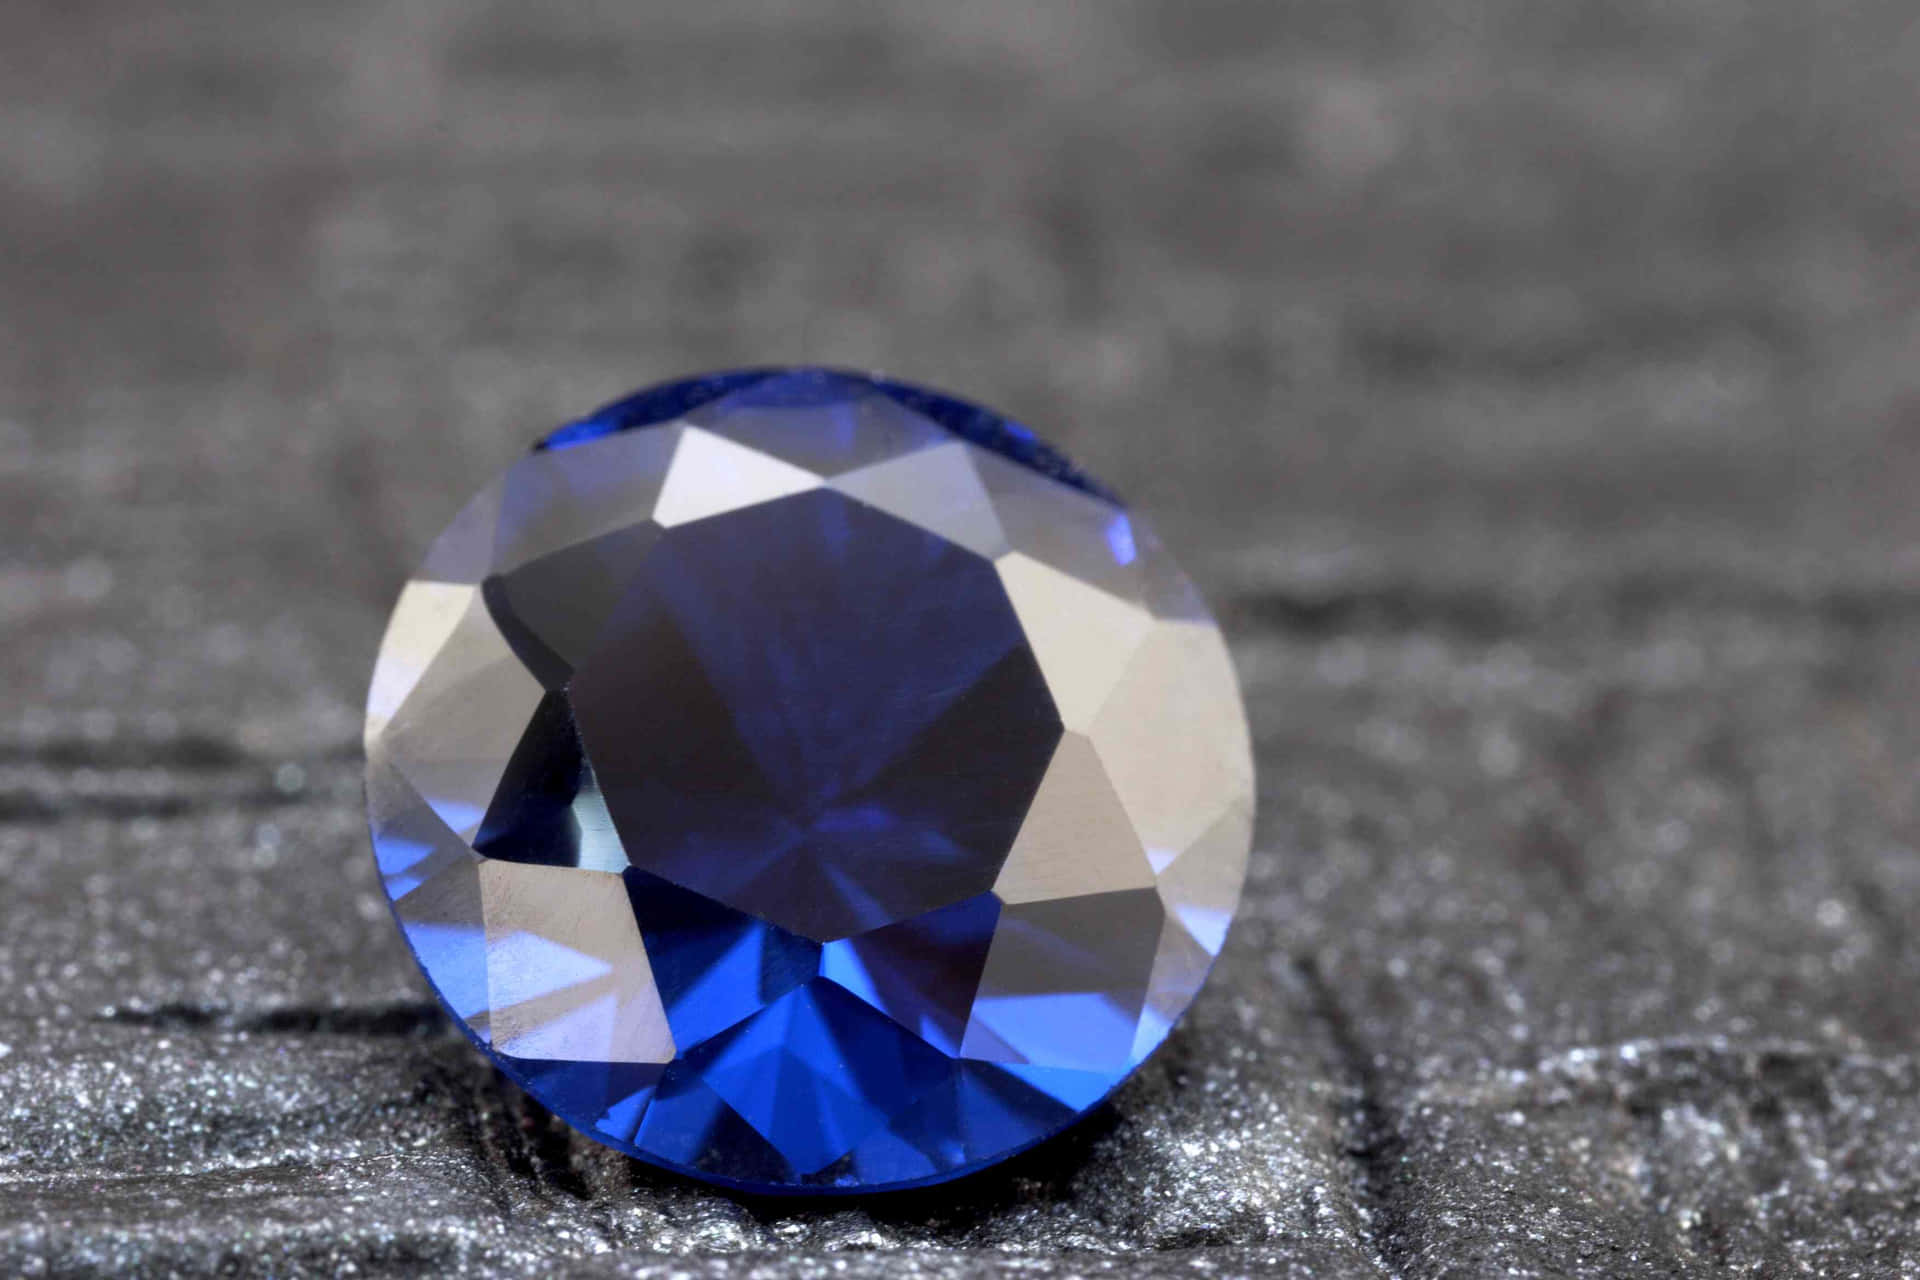 A Blue Sapphire Stone On A Black Surface